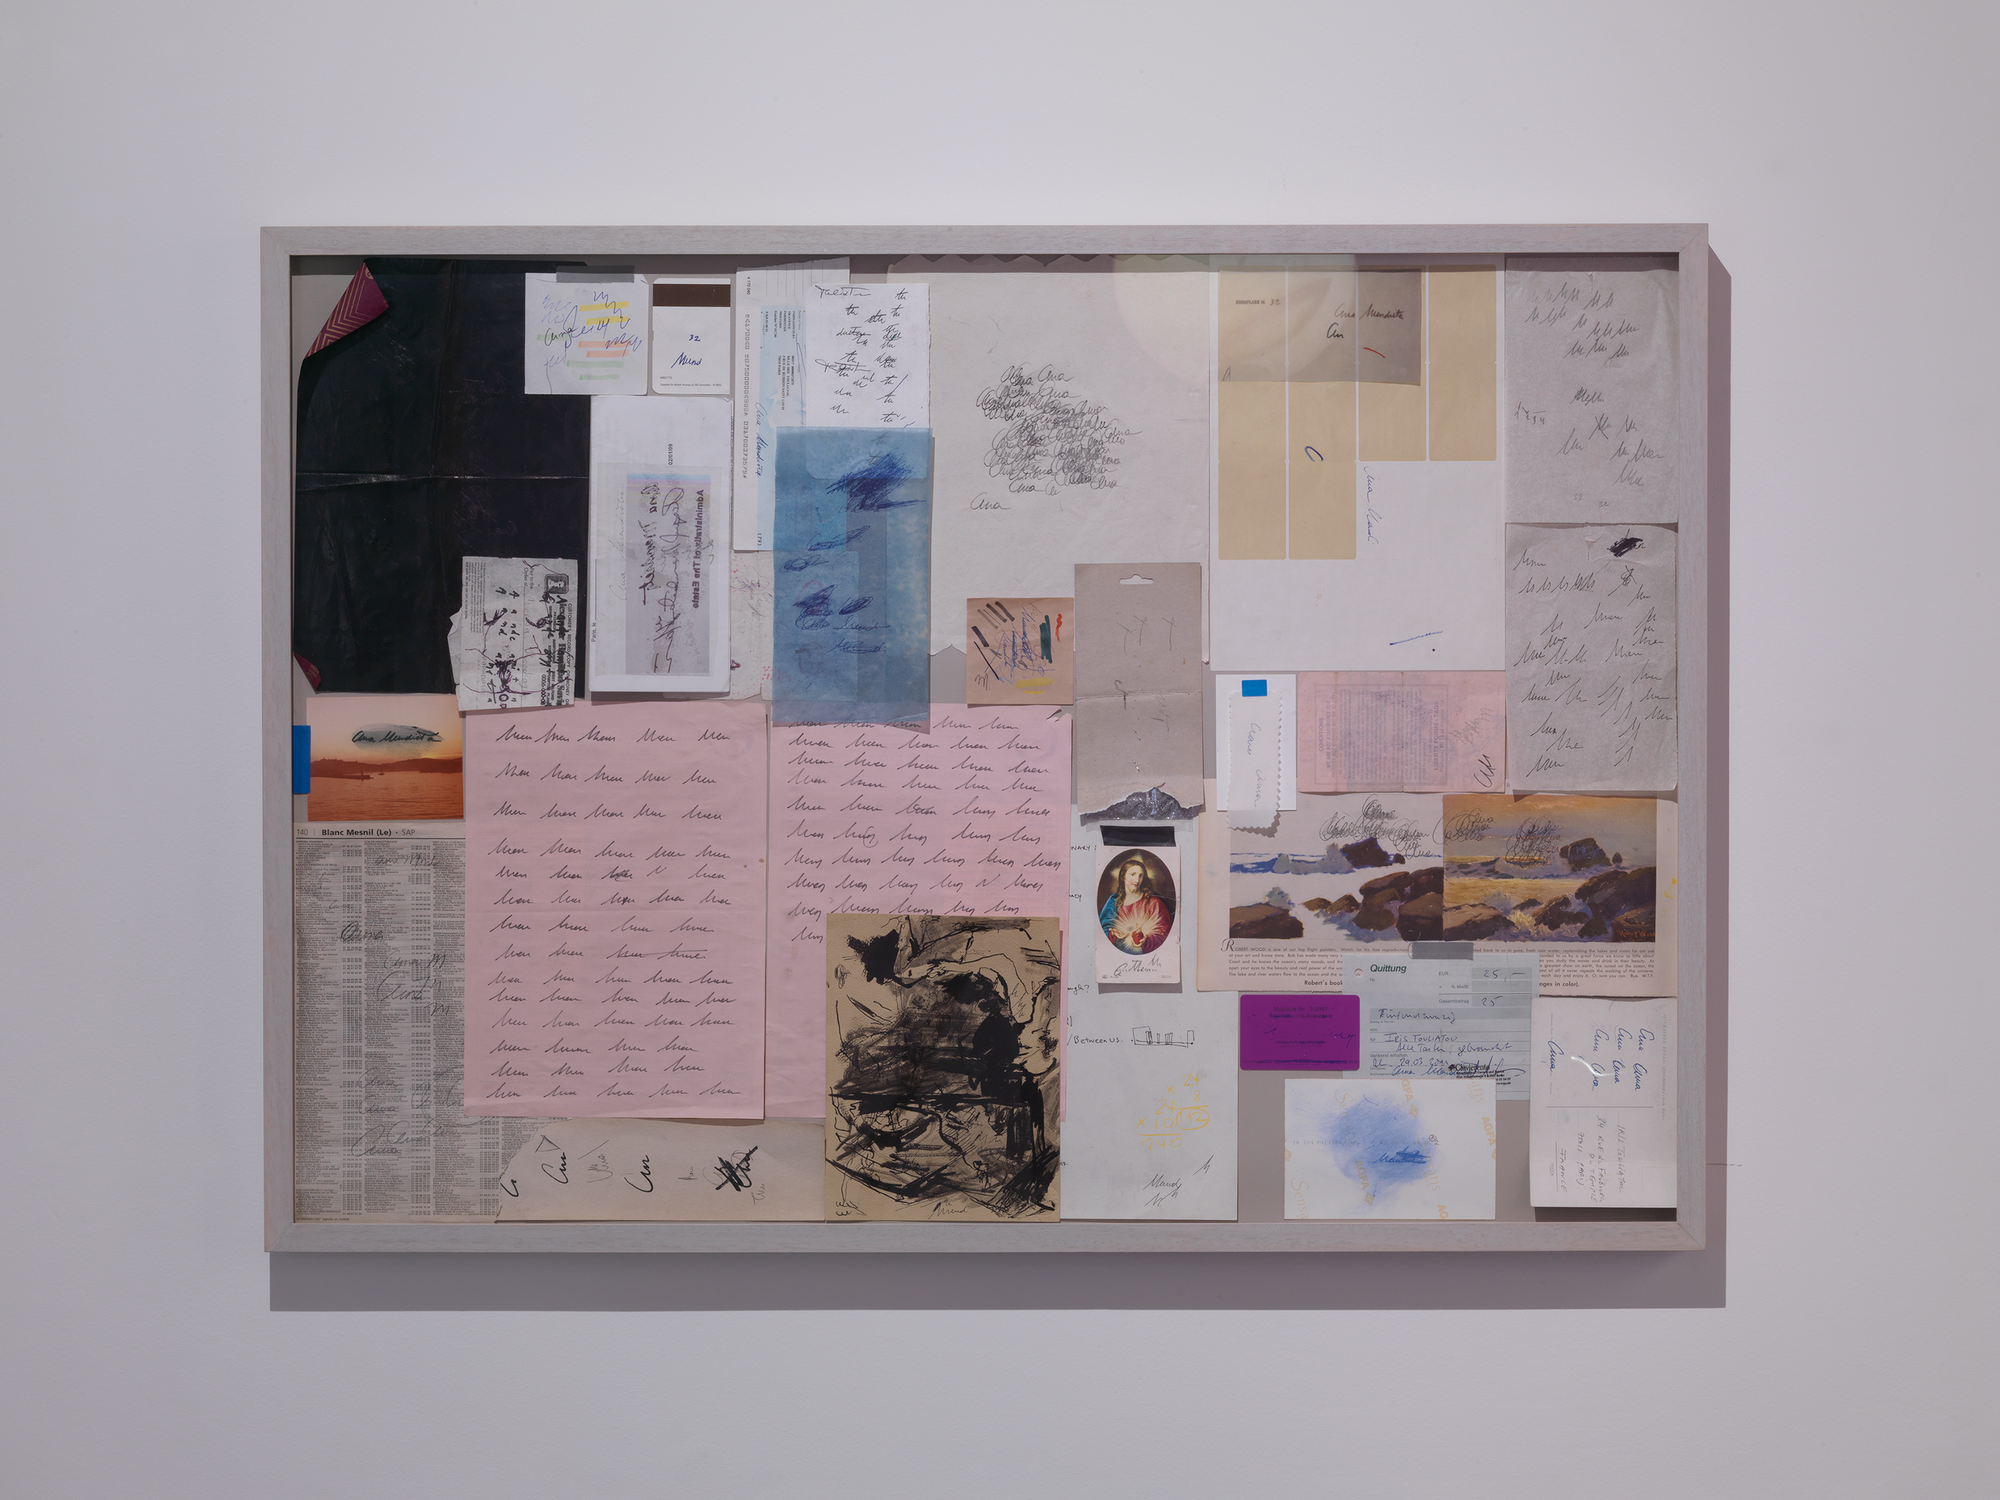 Iris Touliatou, Song, Attempts to forge Ana Mendieta’s signature, various media, 70 x 100 cm (27 1/2 x 39 3/8 in), 2007 – 2009. Installation view, Bright File (June), Haus N Athen, Athens, 2018